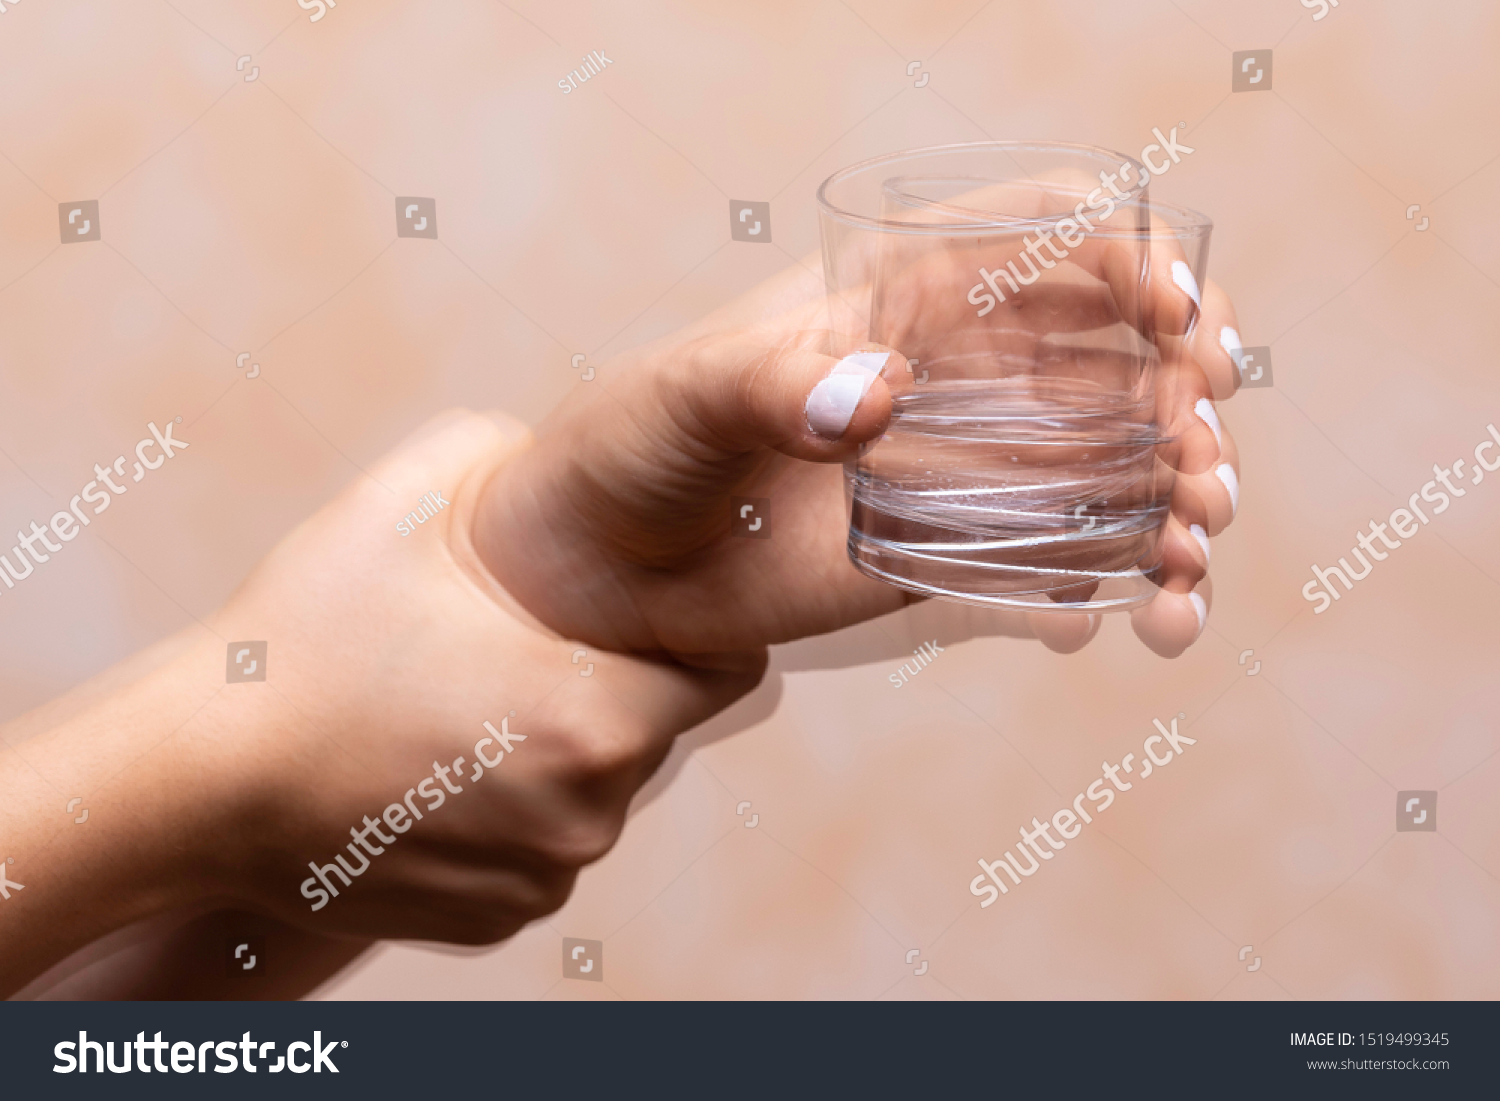 A closeup view on the hands of a person trying to hold a glass of water steady, shaking hands symptomatic of a central nervous and motor system disease such as Parkinson's #1519499345